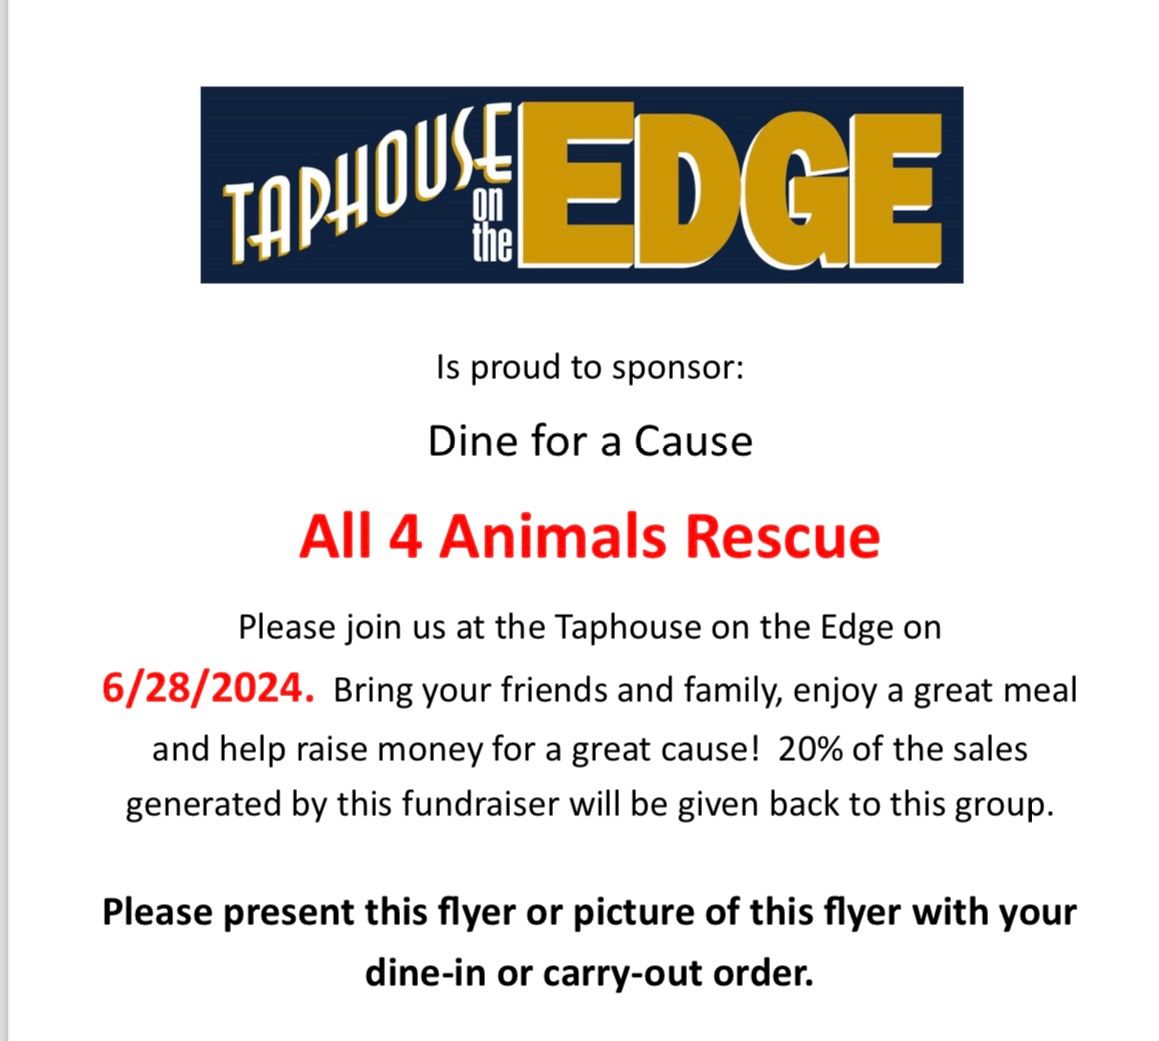 Dine for a Cause at Taphouse on the Edge